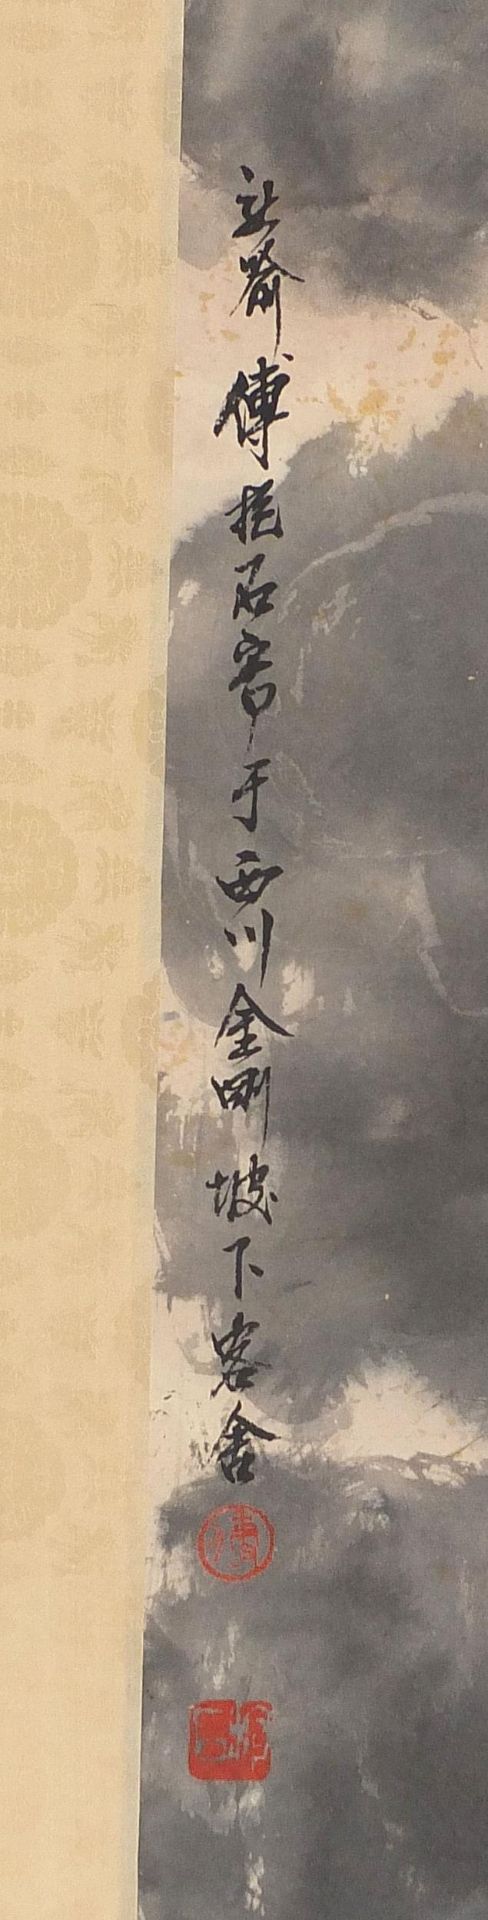 Attributed to Fu Baoshi - Female celestial spreading auspiciousness with inscribed poem attributed - Image 5 of 7